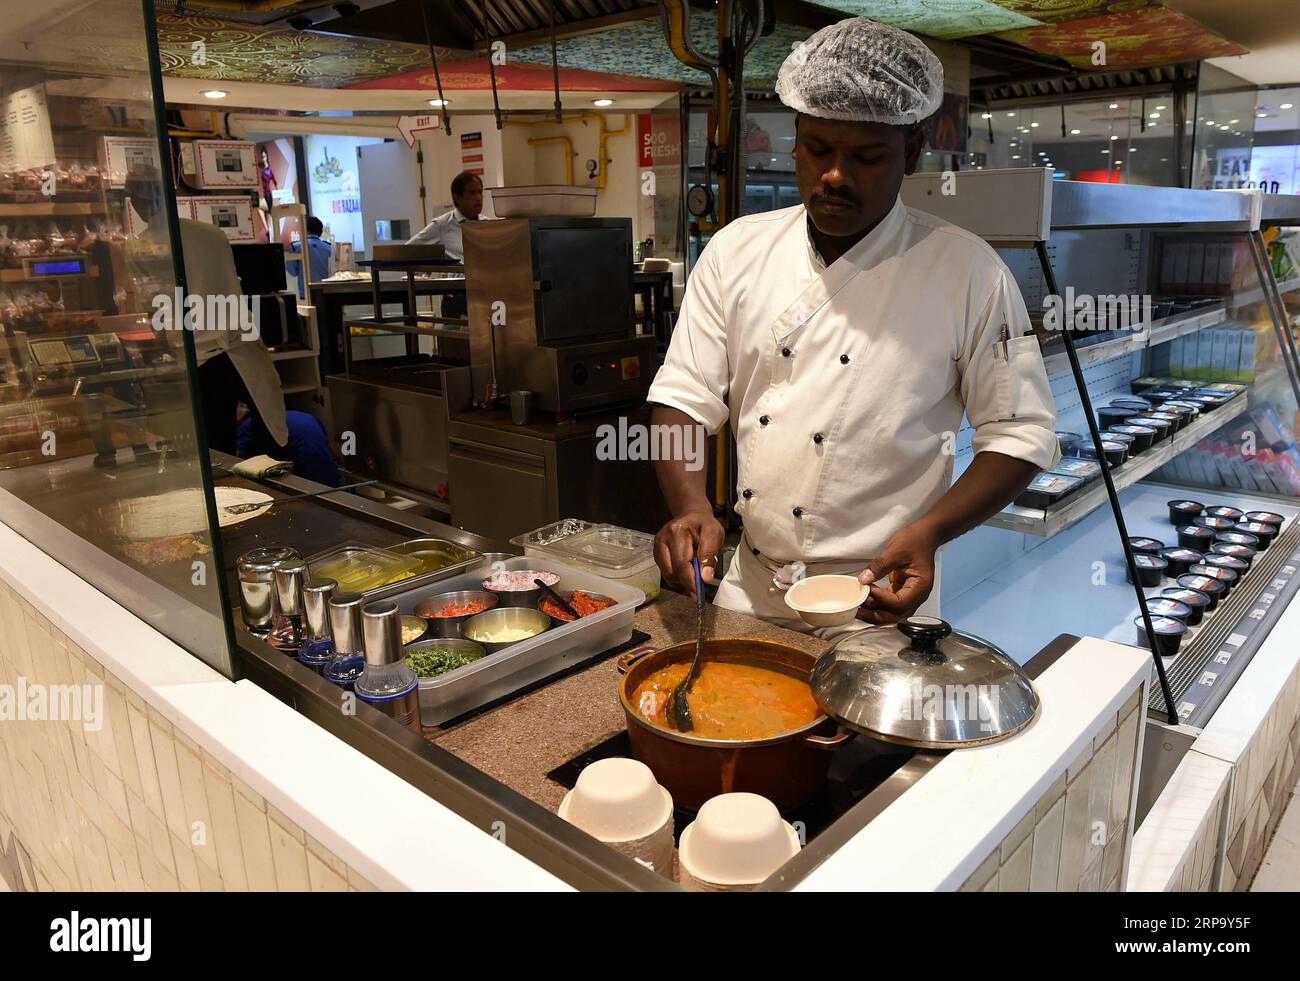 (190419) -- NEW DELHI, April 19, 2019 (Xinhua) -- An Indian chef serves curry soup for a customer at a supermarket in New Delhi, India, April 18, 2019. Dosa, a crispy paper-thin wrap with a spicy potato filling, eaten dipped in a tangy soup and a special sauce or chutney, is popular in southern India. (Xinhua/Zhang Naijie) INDIA-NEW DELHI-DOSA PUBLICATIONxNOTxINxCHN Stock Photo